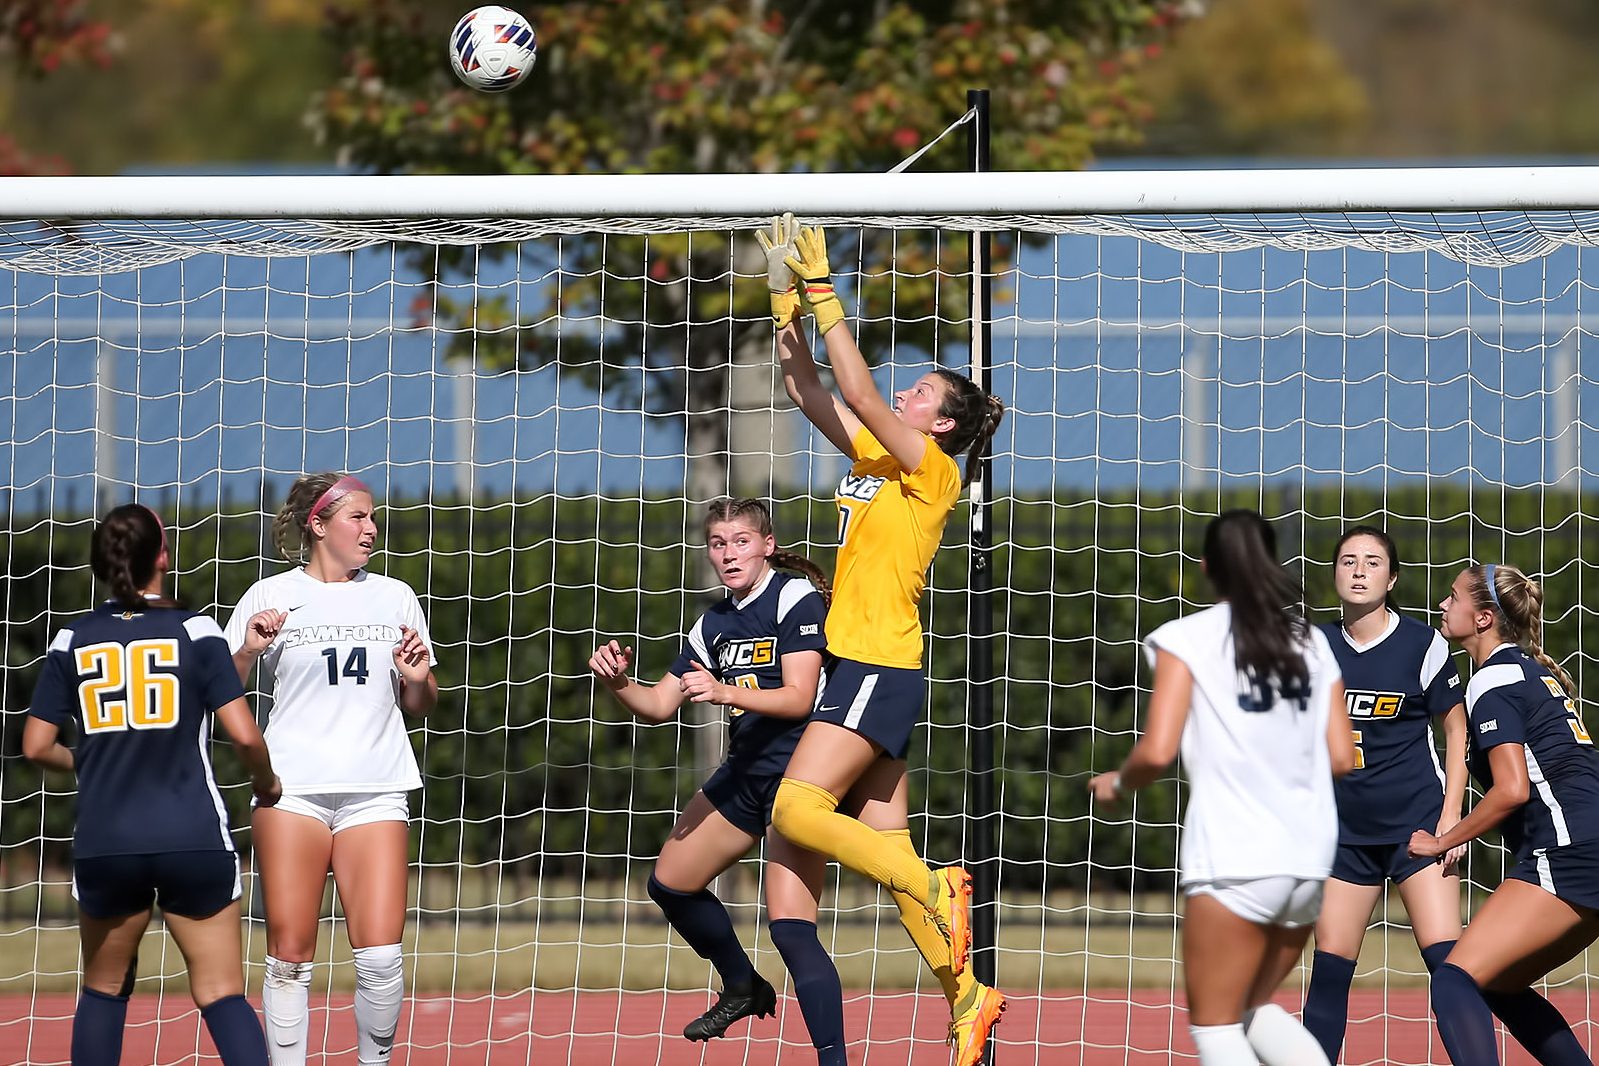 Emma Malone makes a save in a game against Samford University